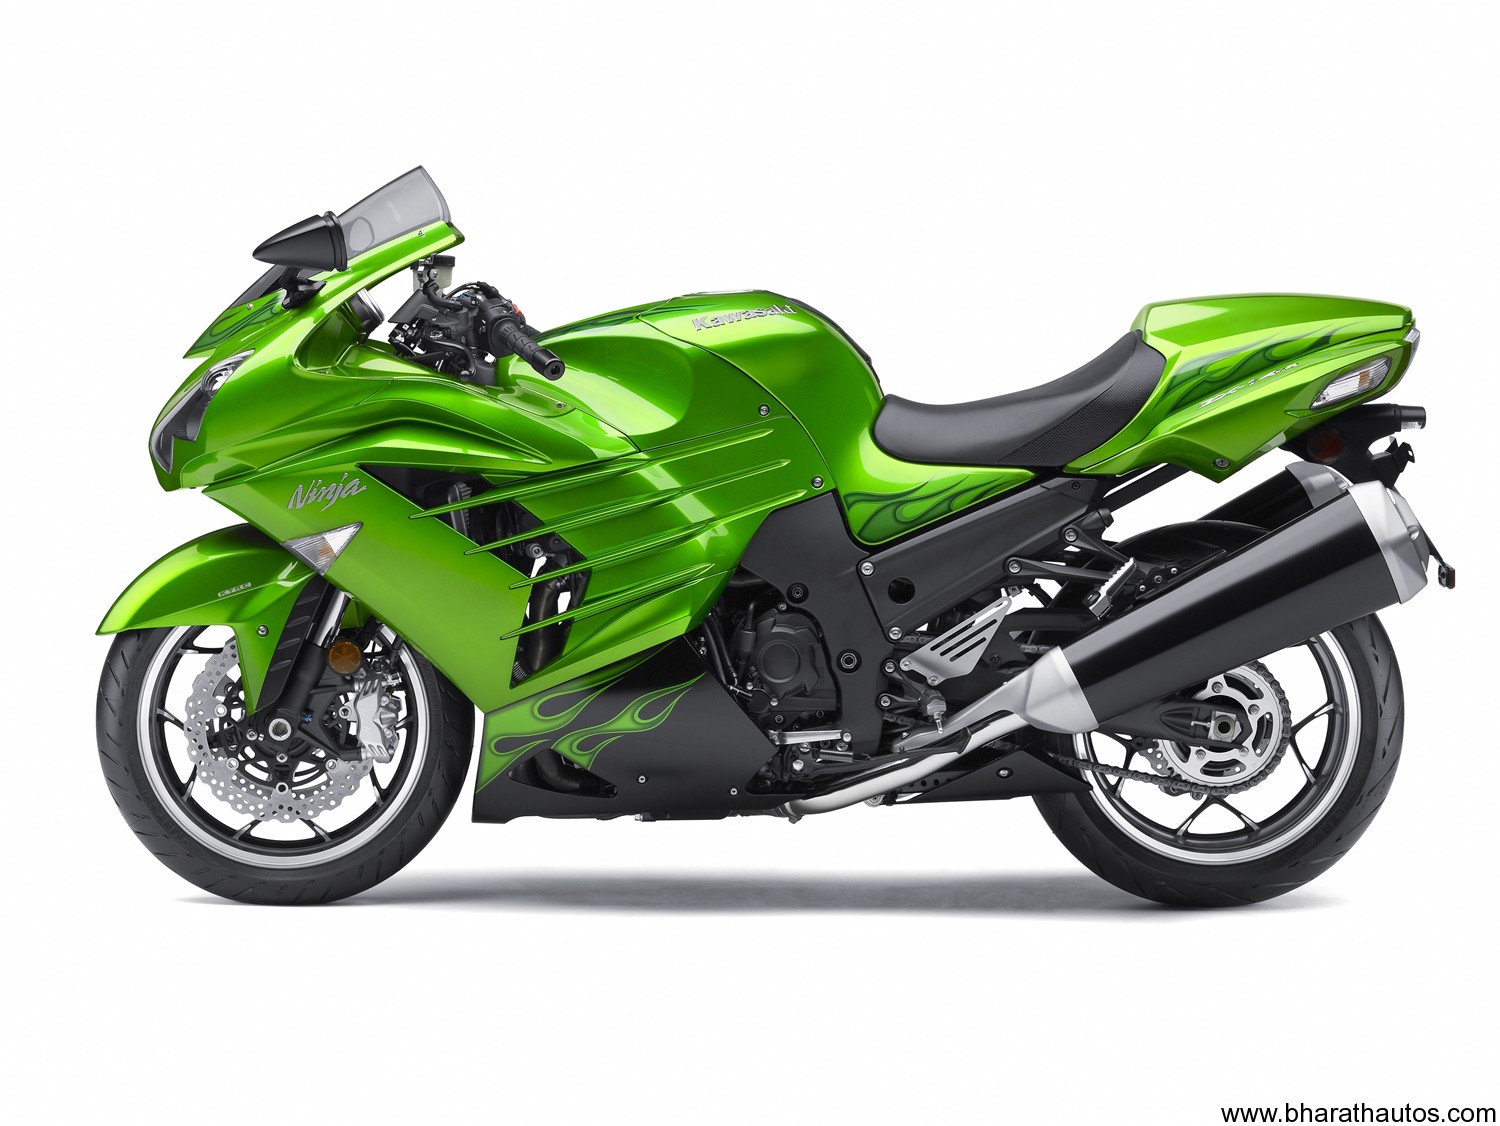 2012 Kawasaki ZZR1400 is the world s fastest motorcycle